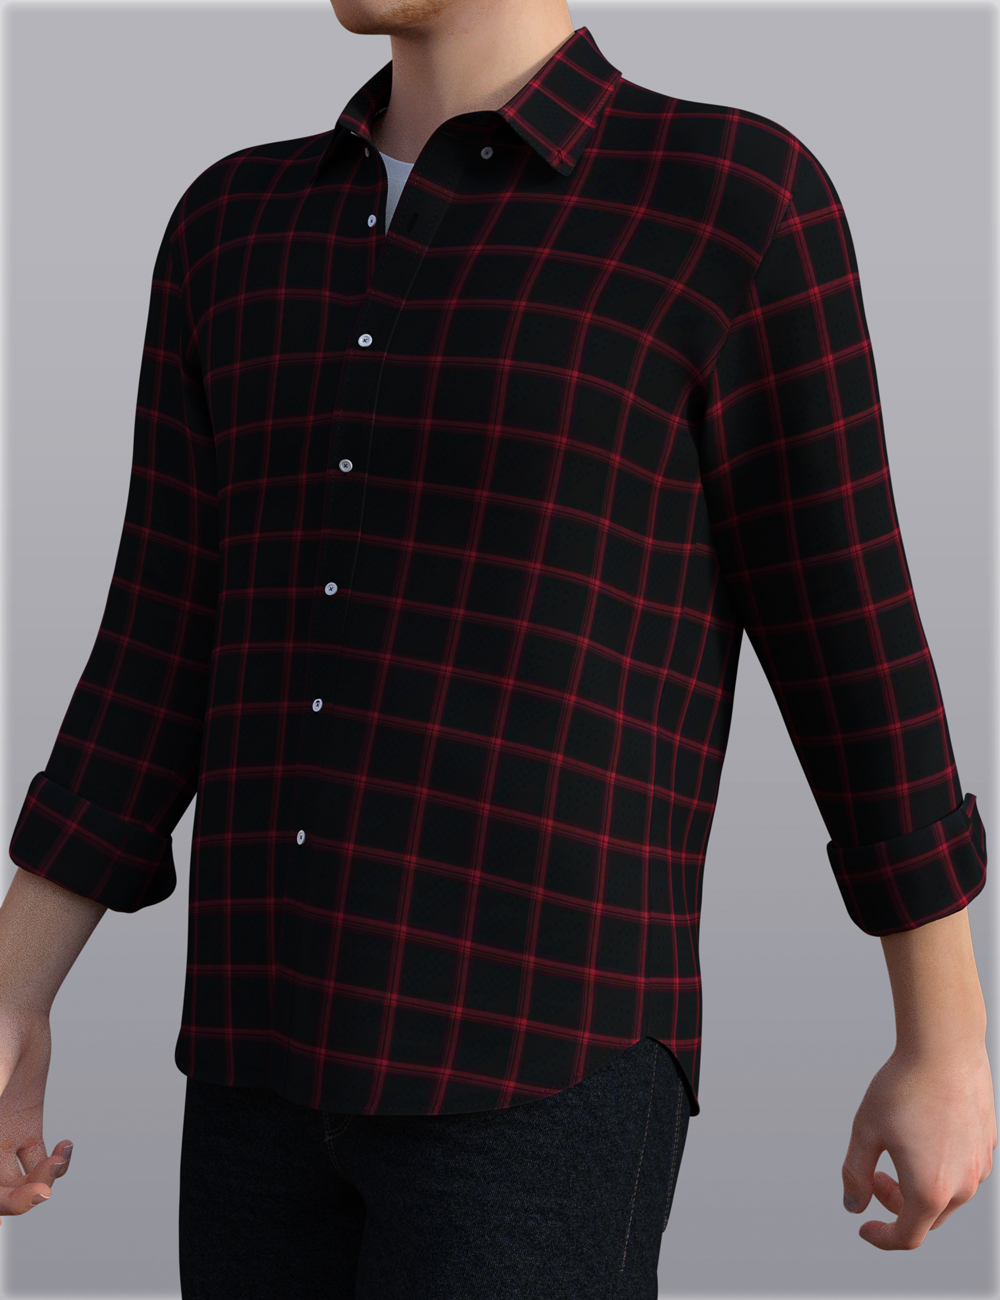 H&C Checkered Shirt Outfit for Genesis 3 Male(s) by: IH Kang, 3D Models by Daz 3D